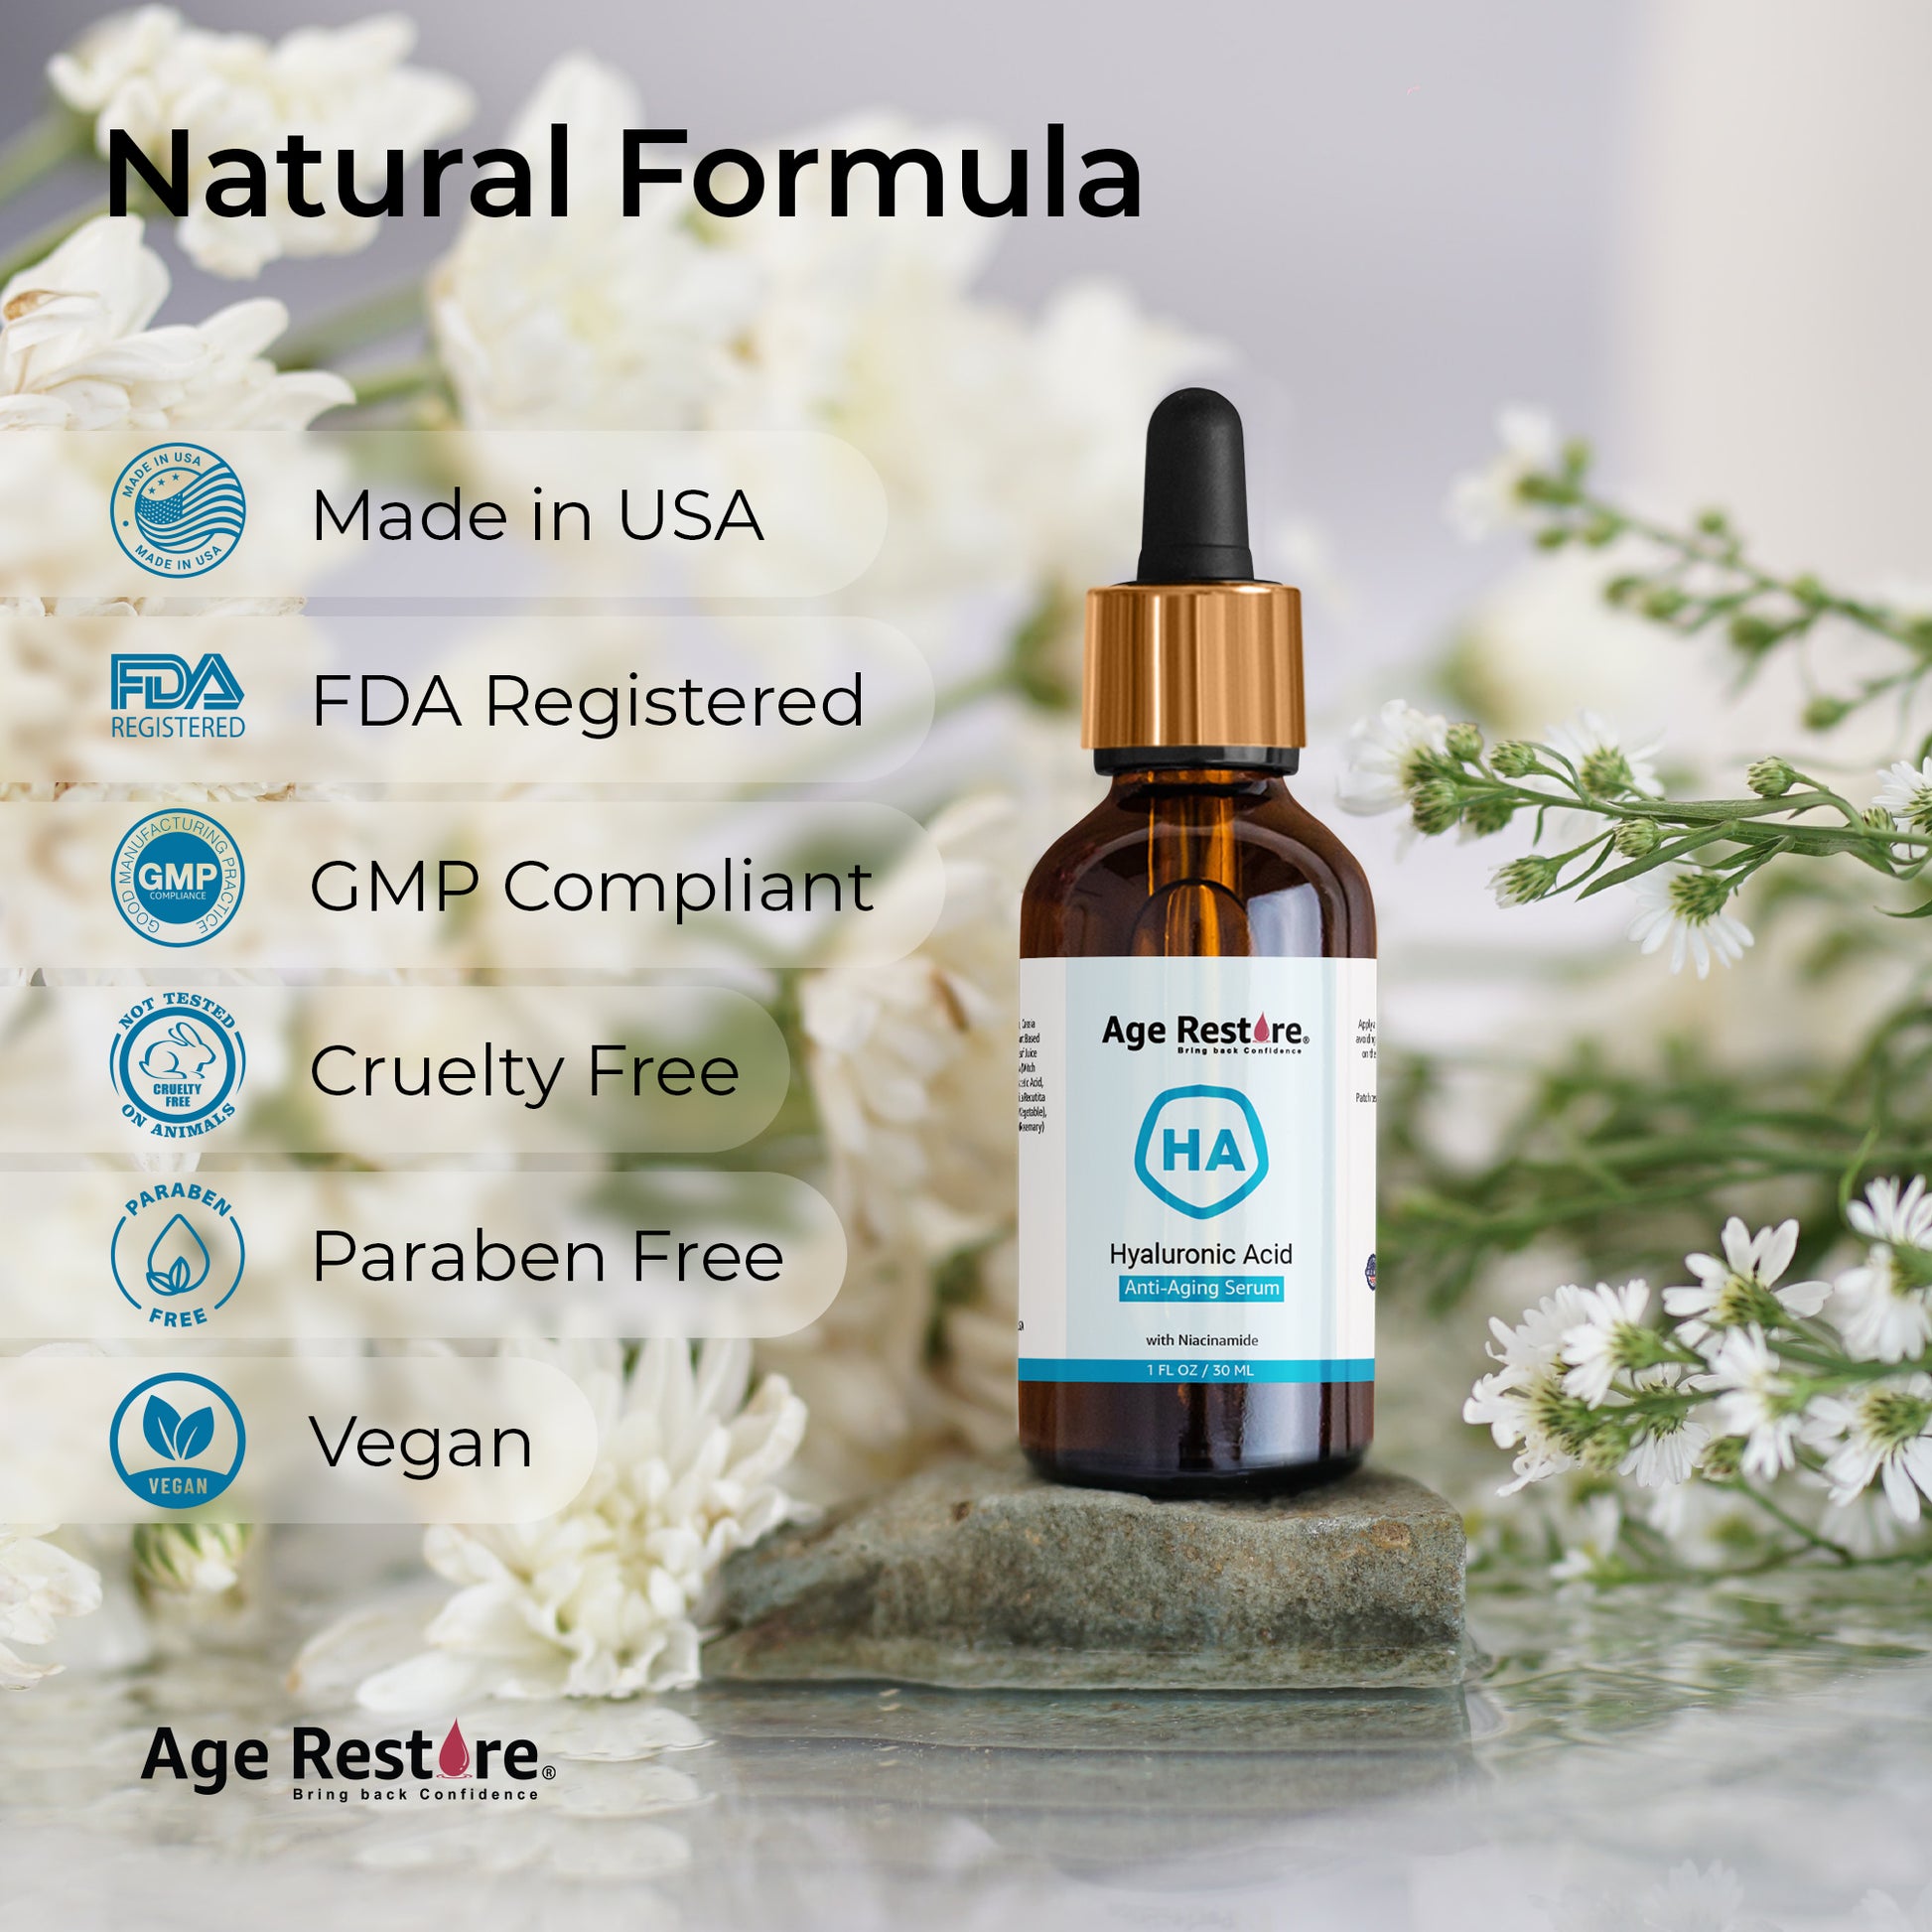 age restore hyaluronic acid usa